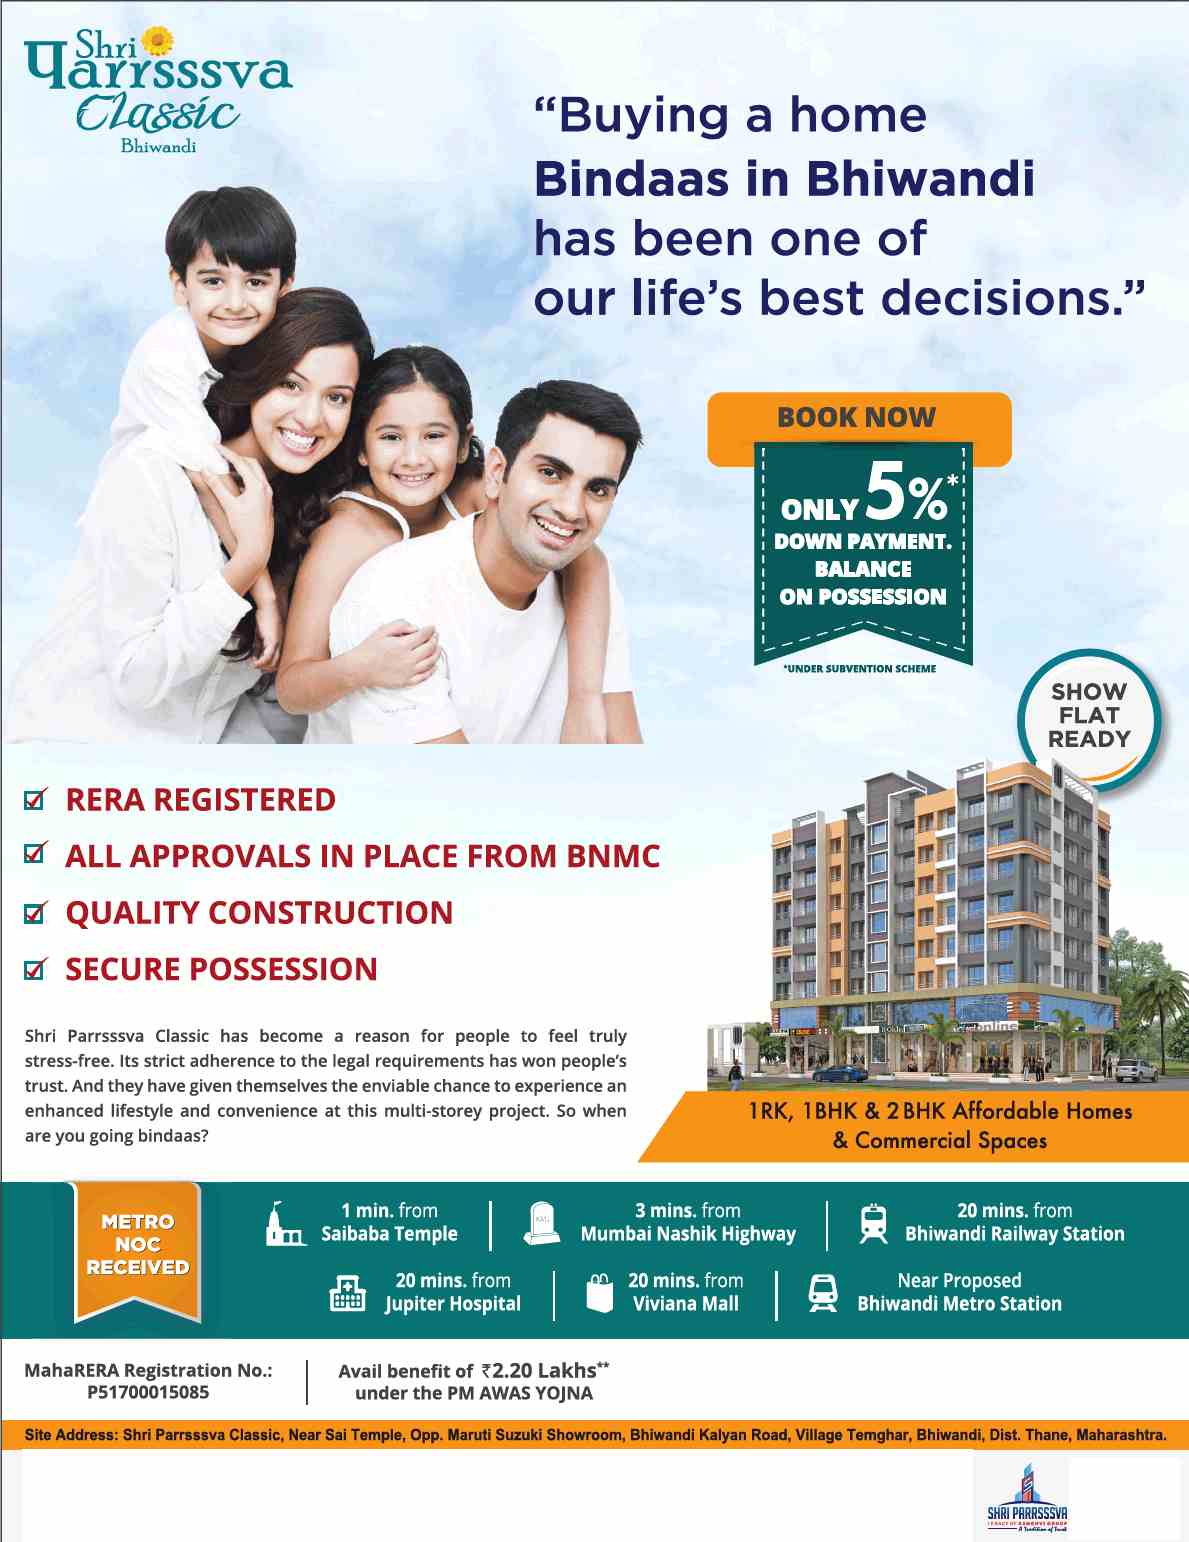 Pay only 5% down payment & balance on possession at Shri Parrsssva Classic in Mumbai Update